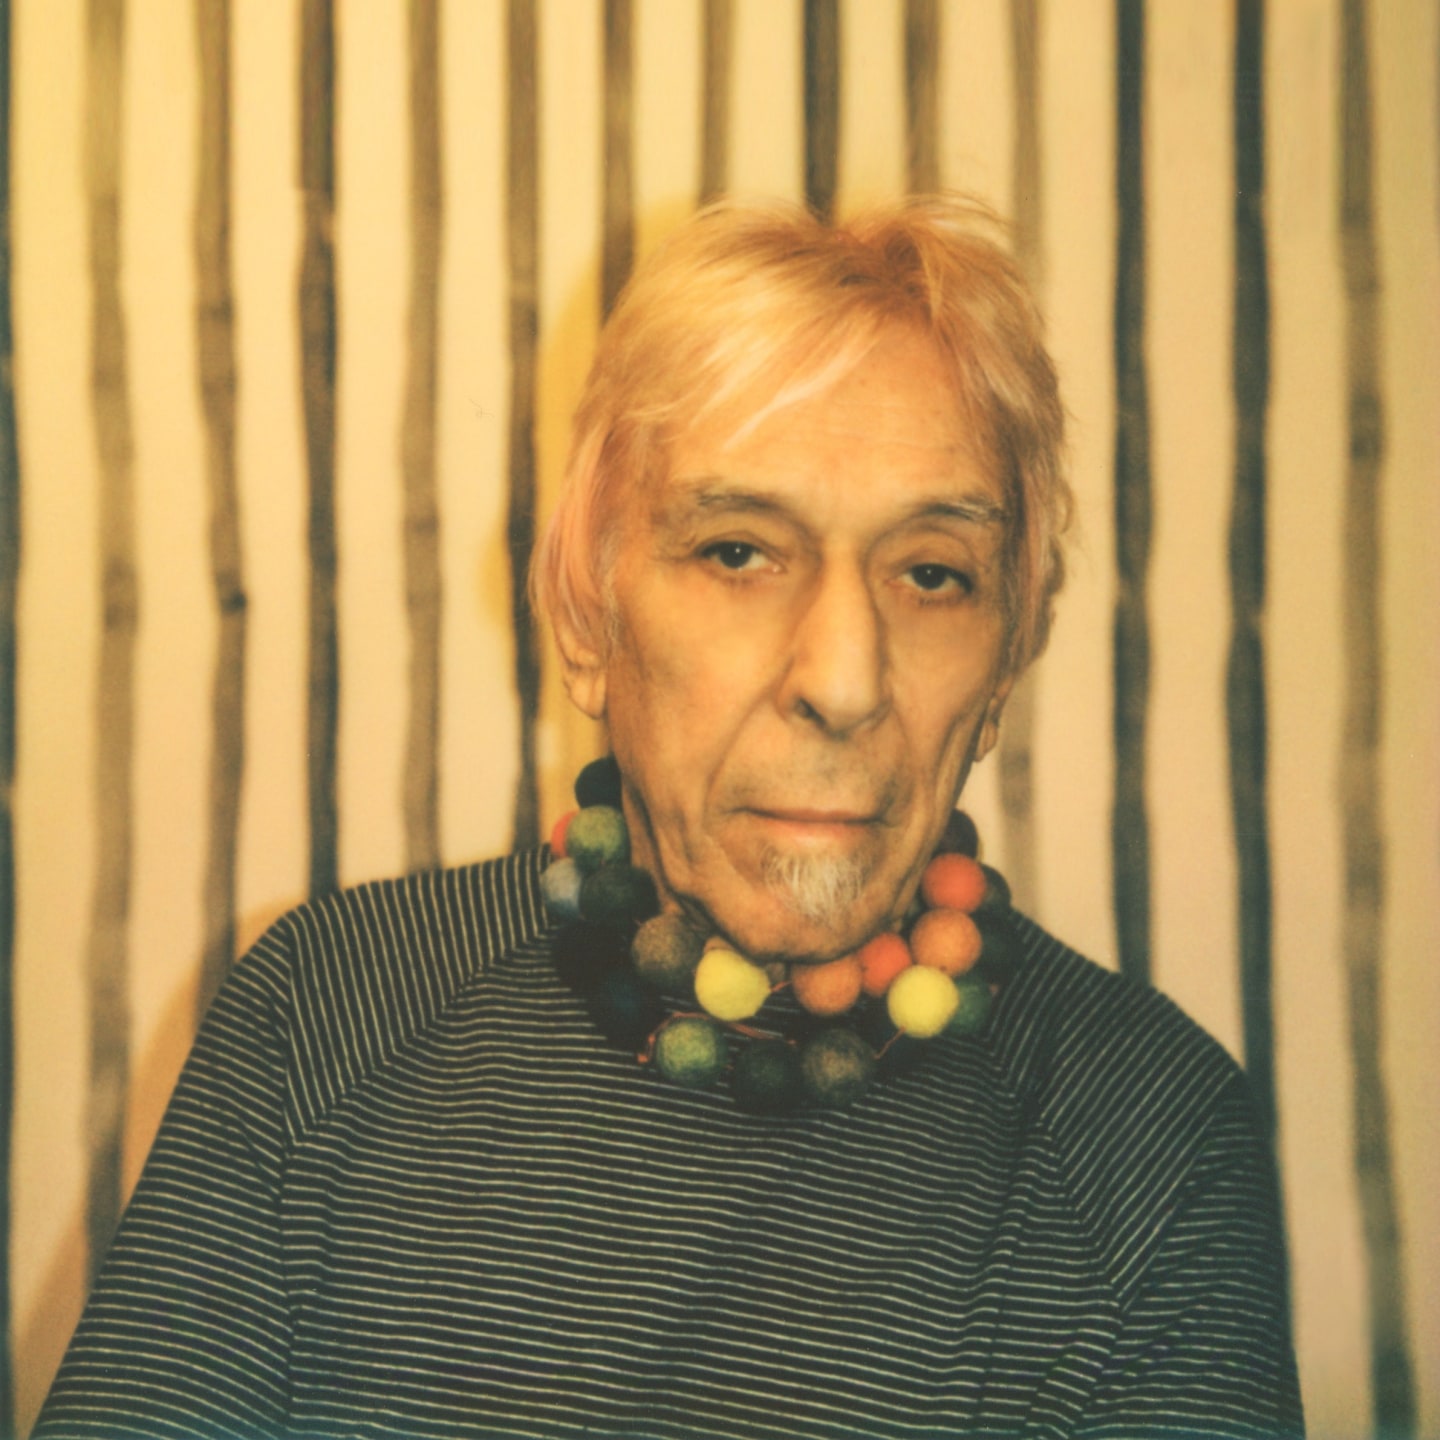 Live News: John Cale and Crumb announce albums, plus new music from Jessica Pratt, Mdou Moctar, and more